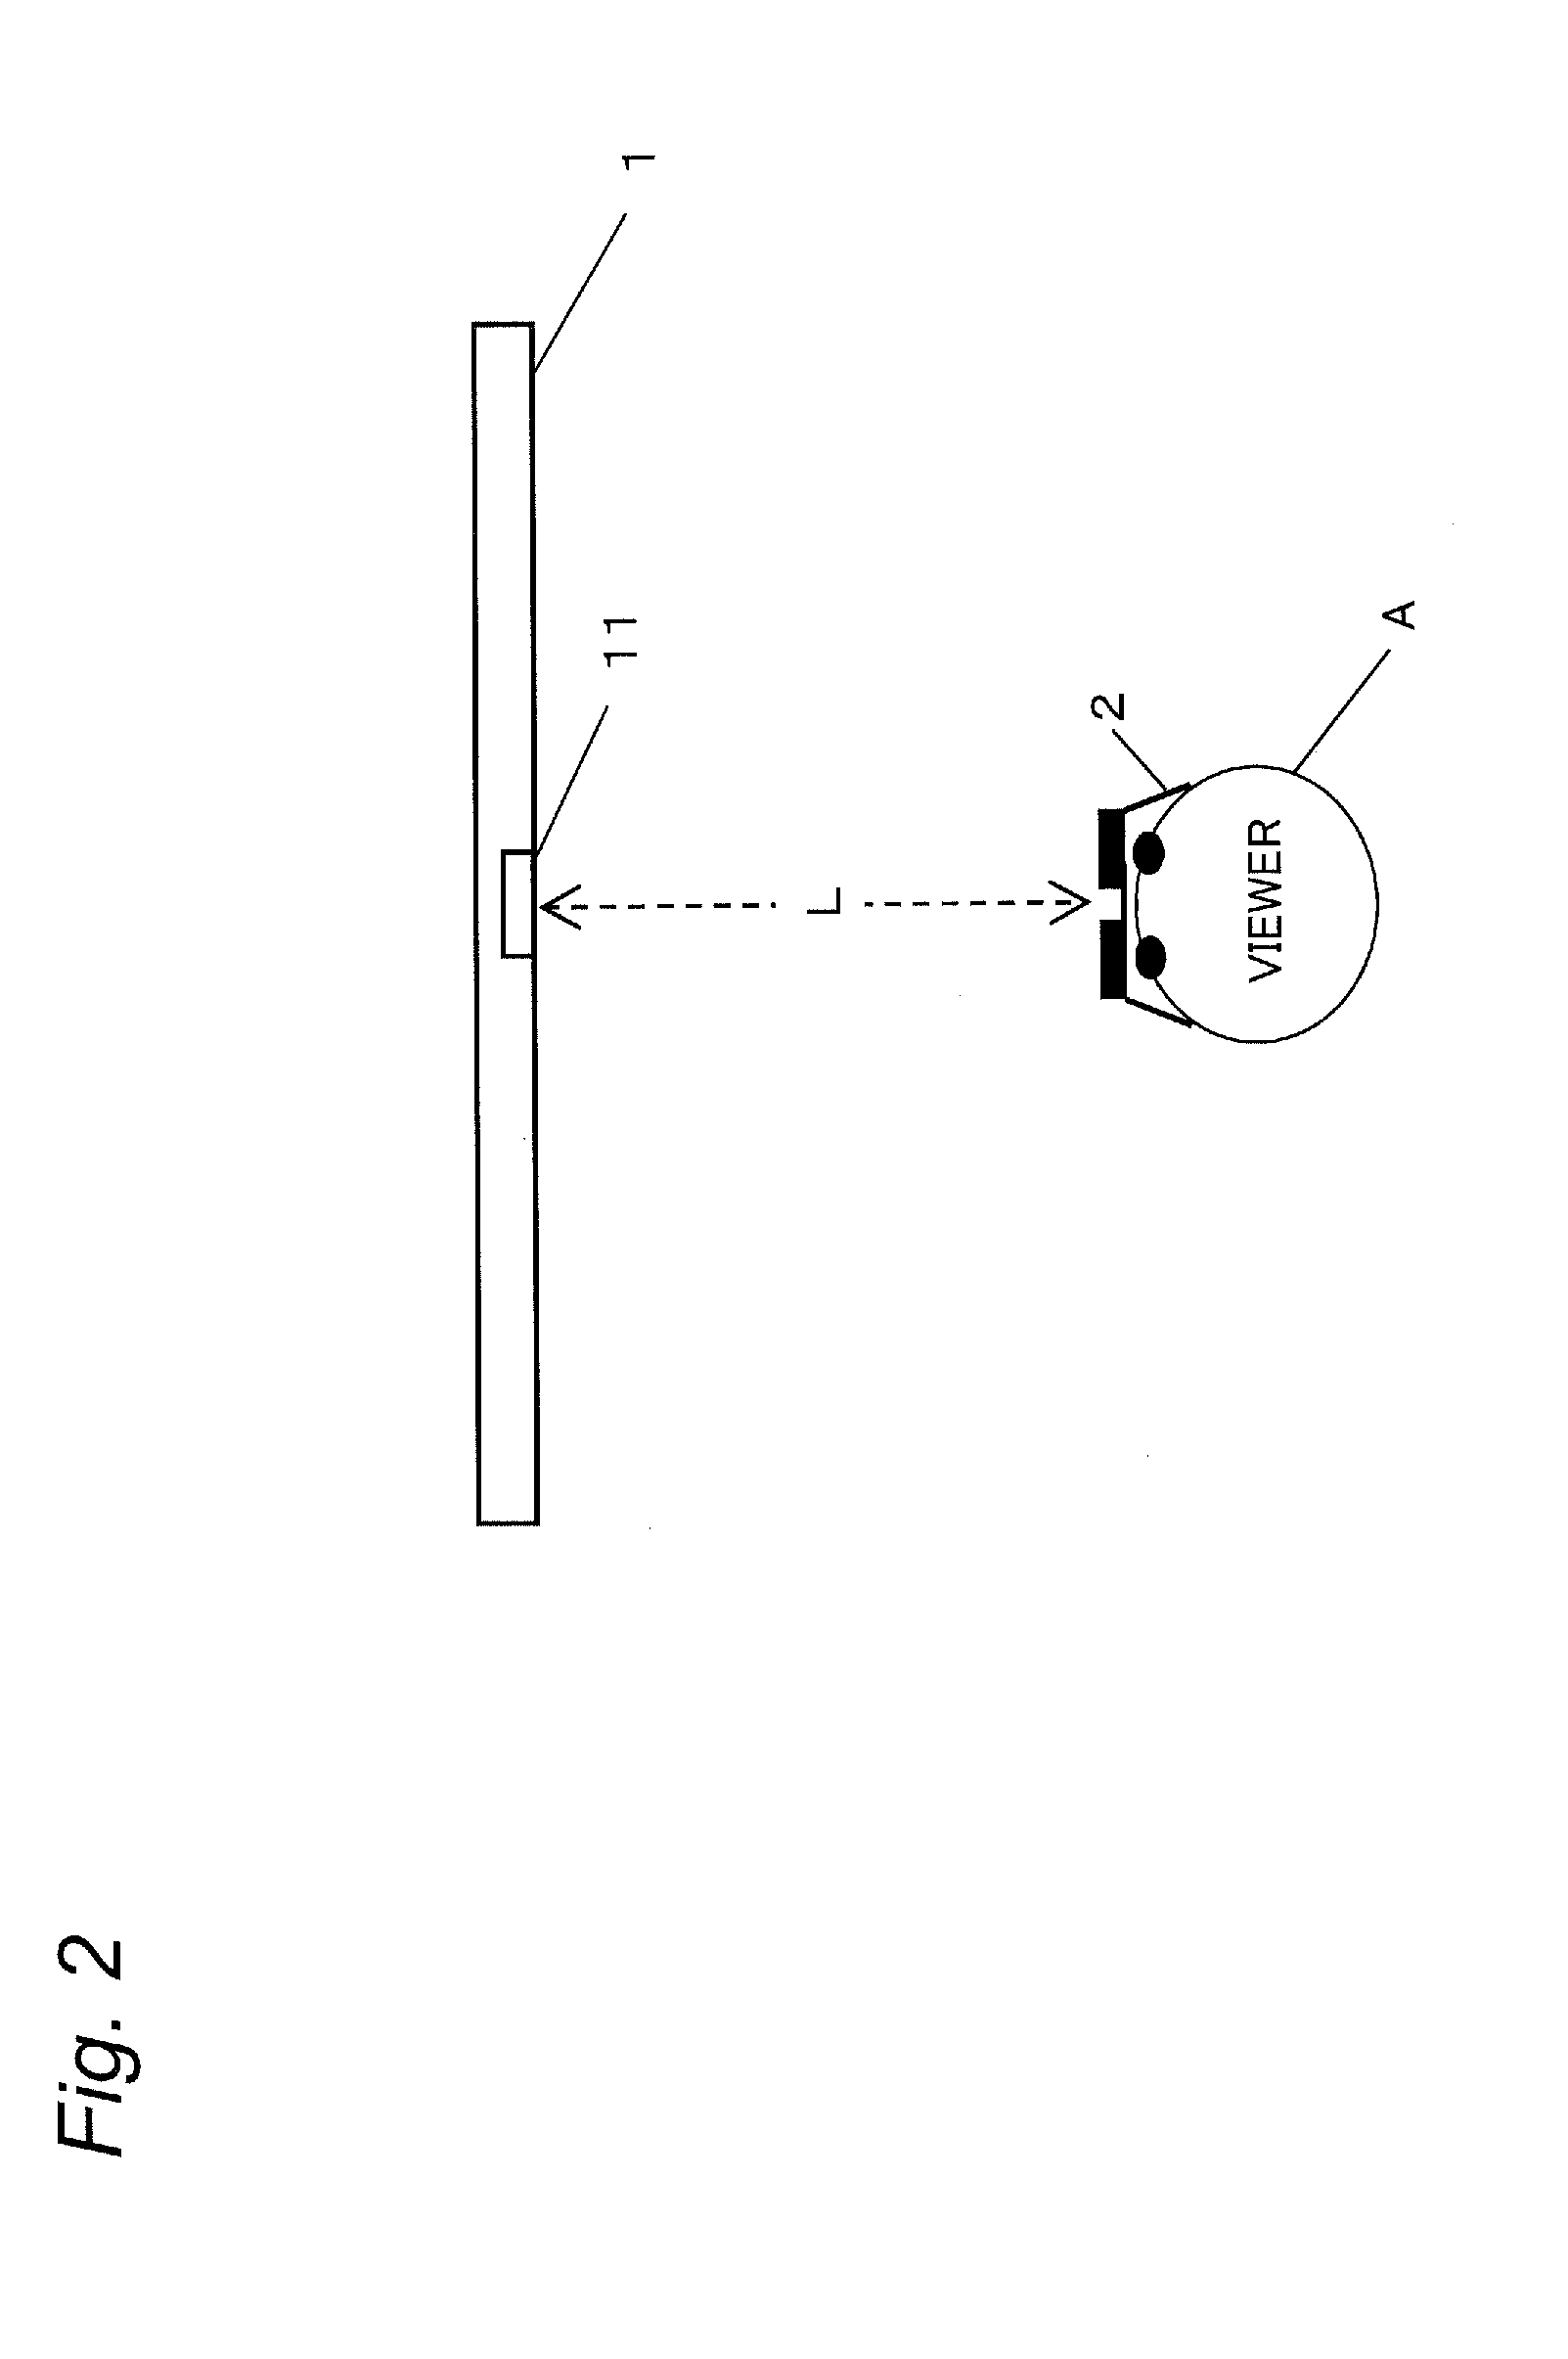 Stereoscopic image viewing eyewear and method for controlling the viewing of stereoscopic images based on a detected distance between a display device and the eyewear